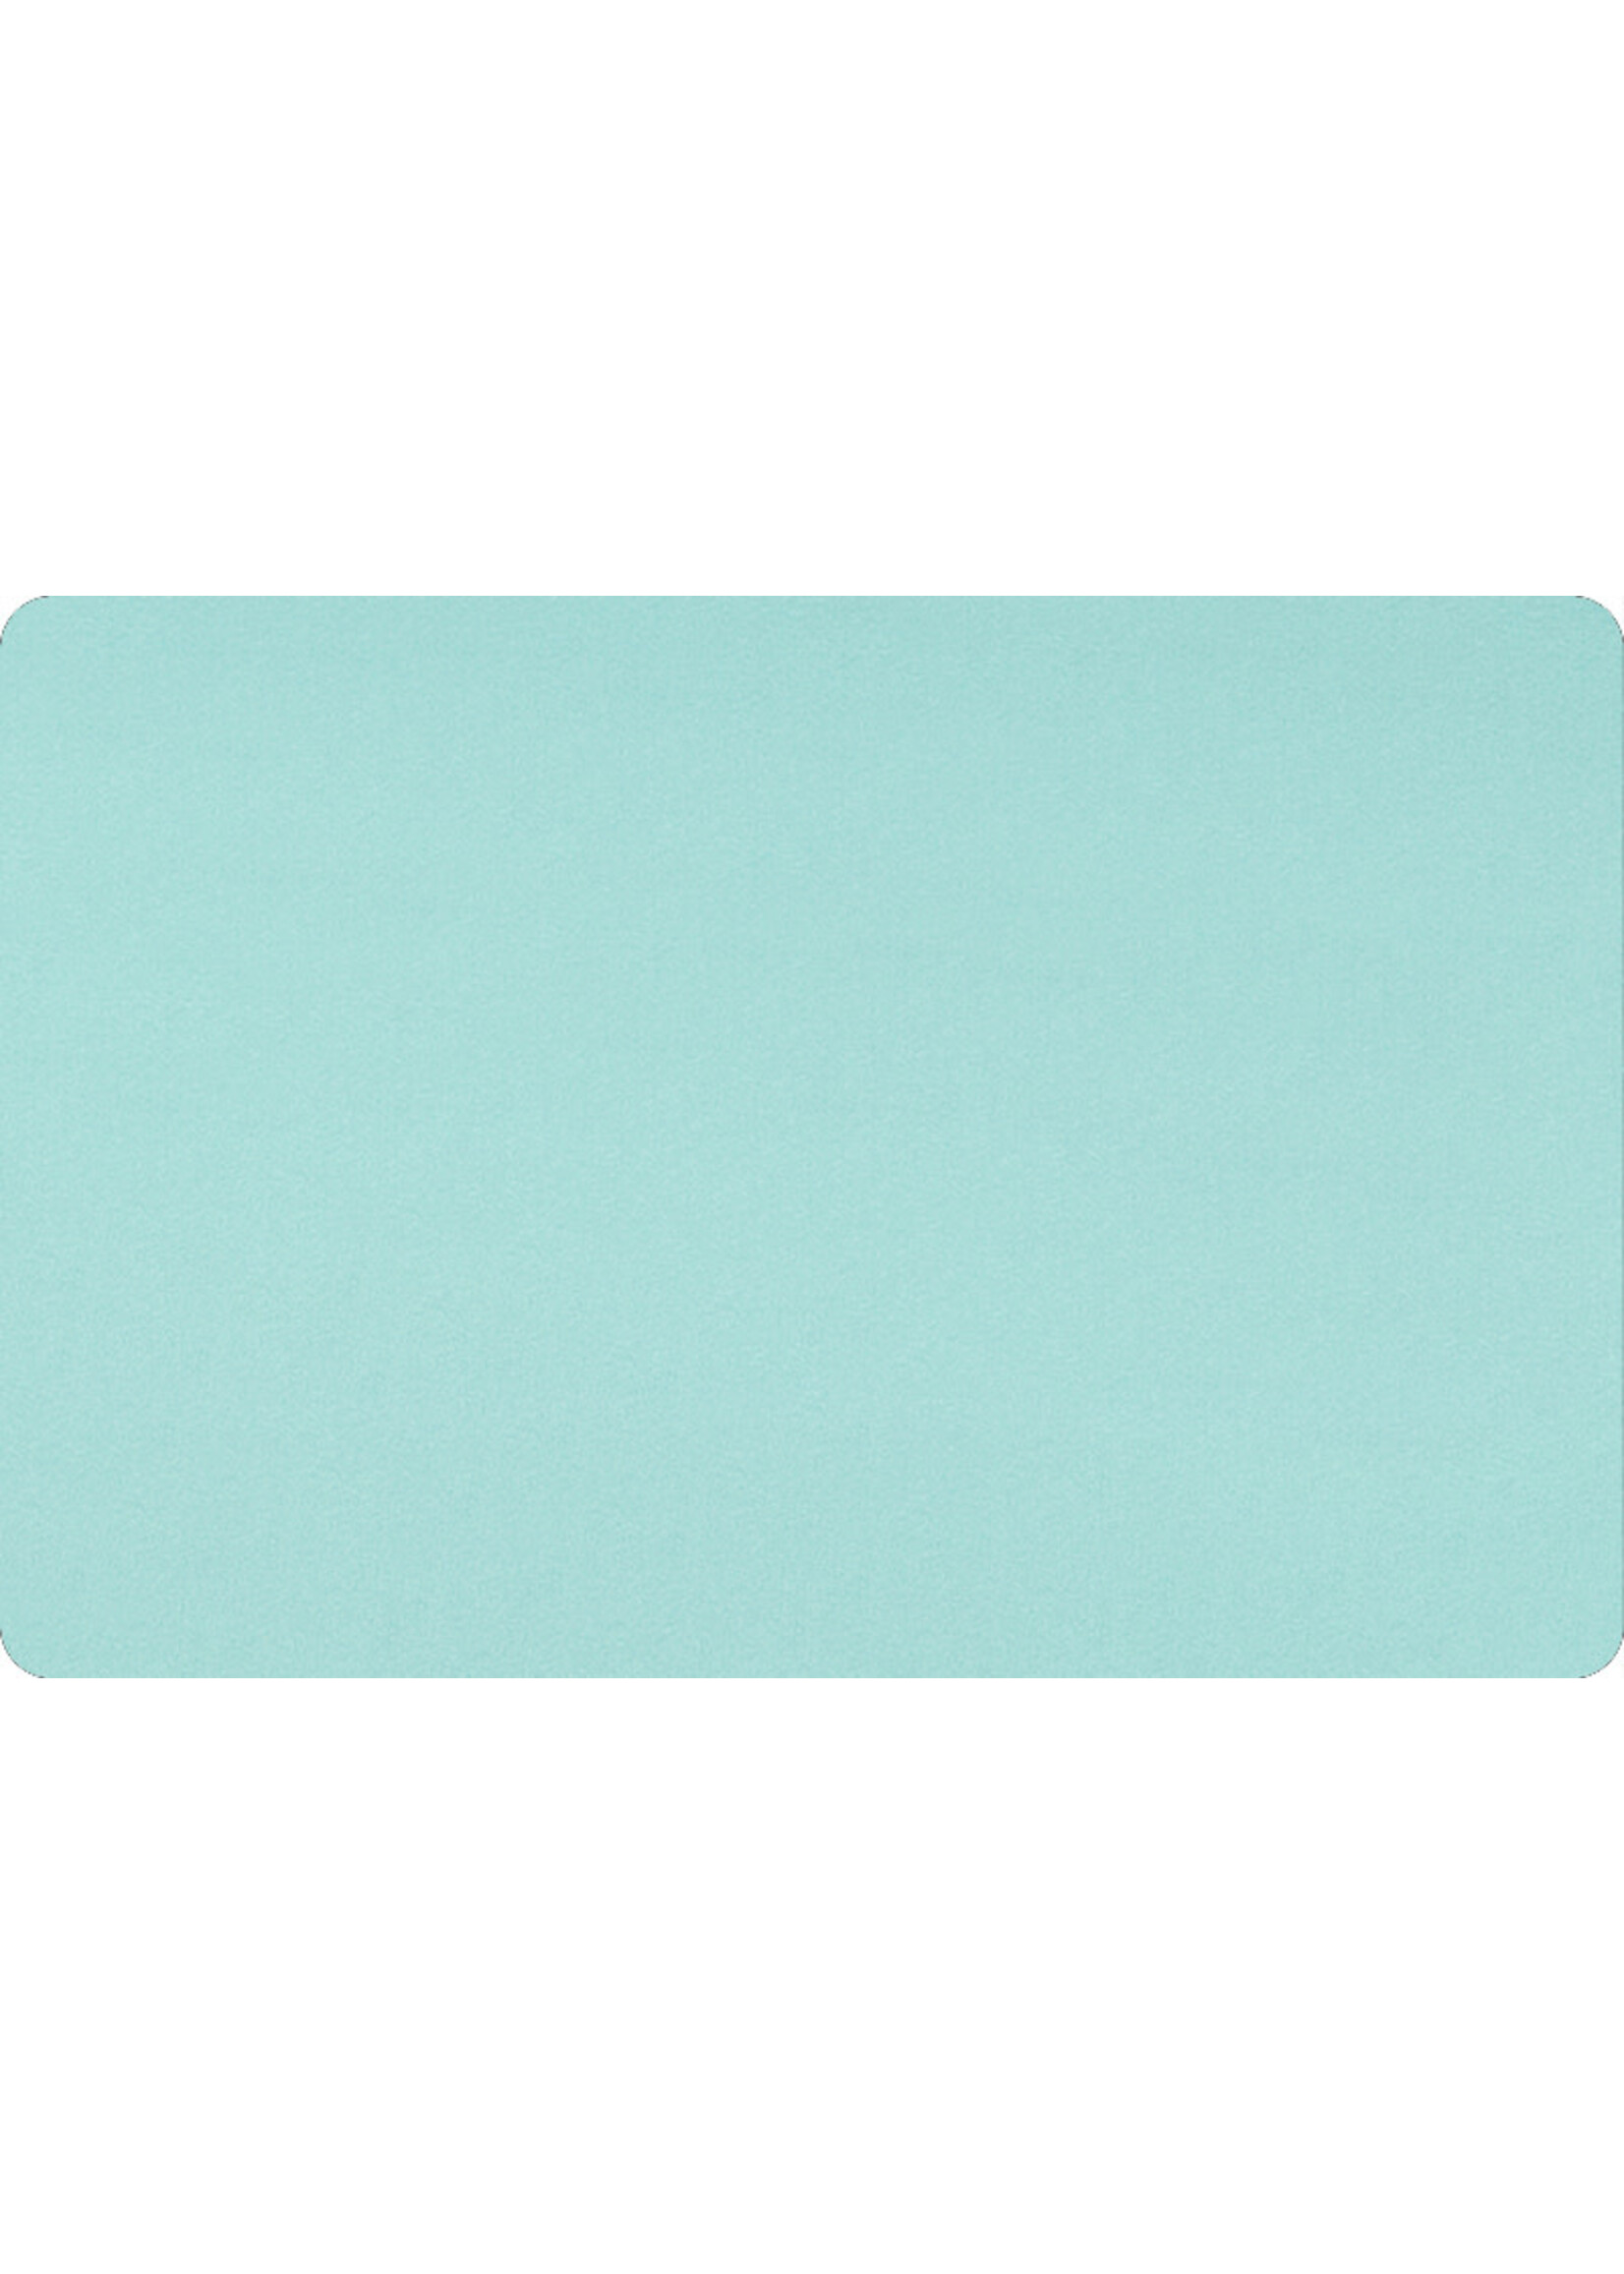 Shannon Fabrics Minky, Extra Wide Solid Cuddle3, 90" Saltwater, (by the inch)